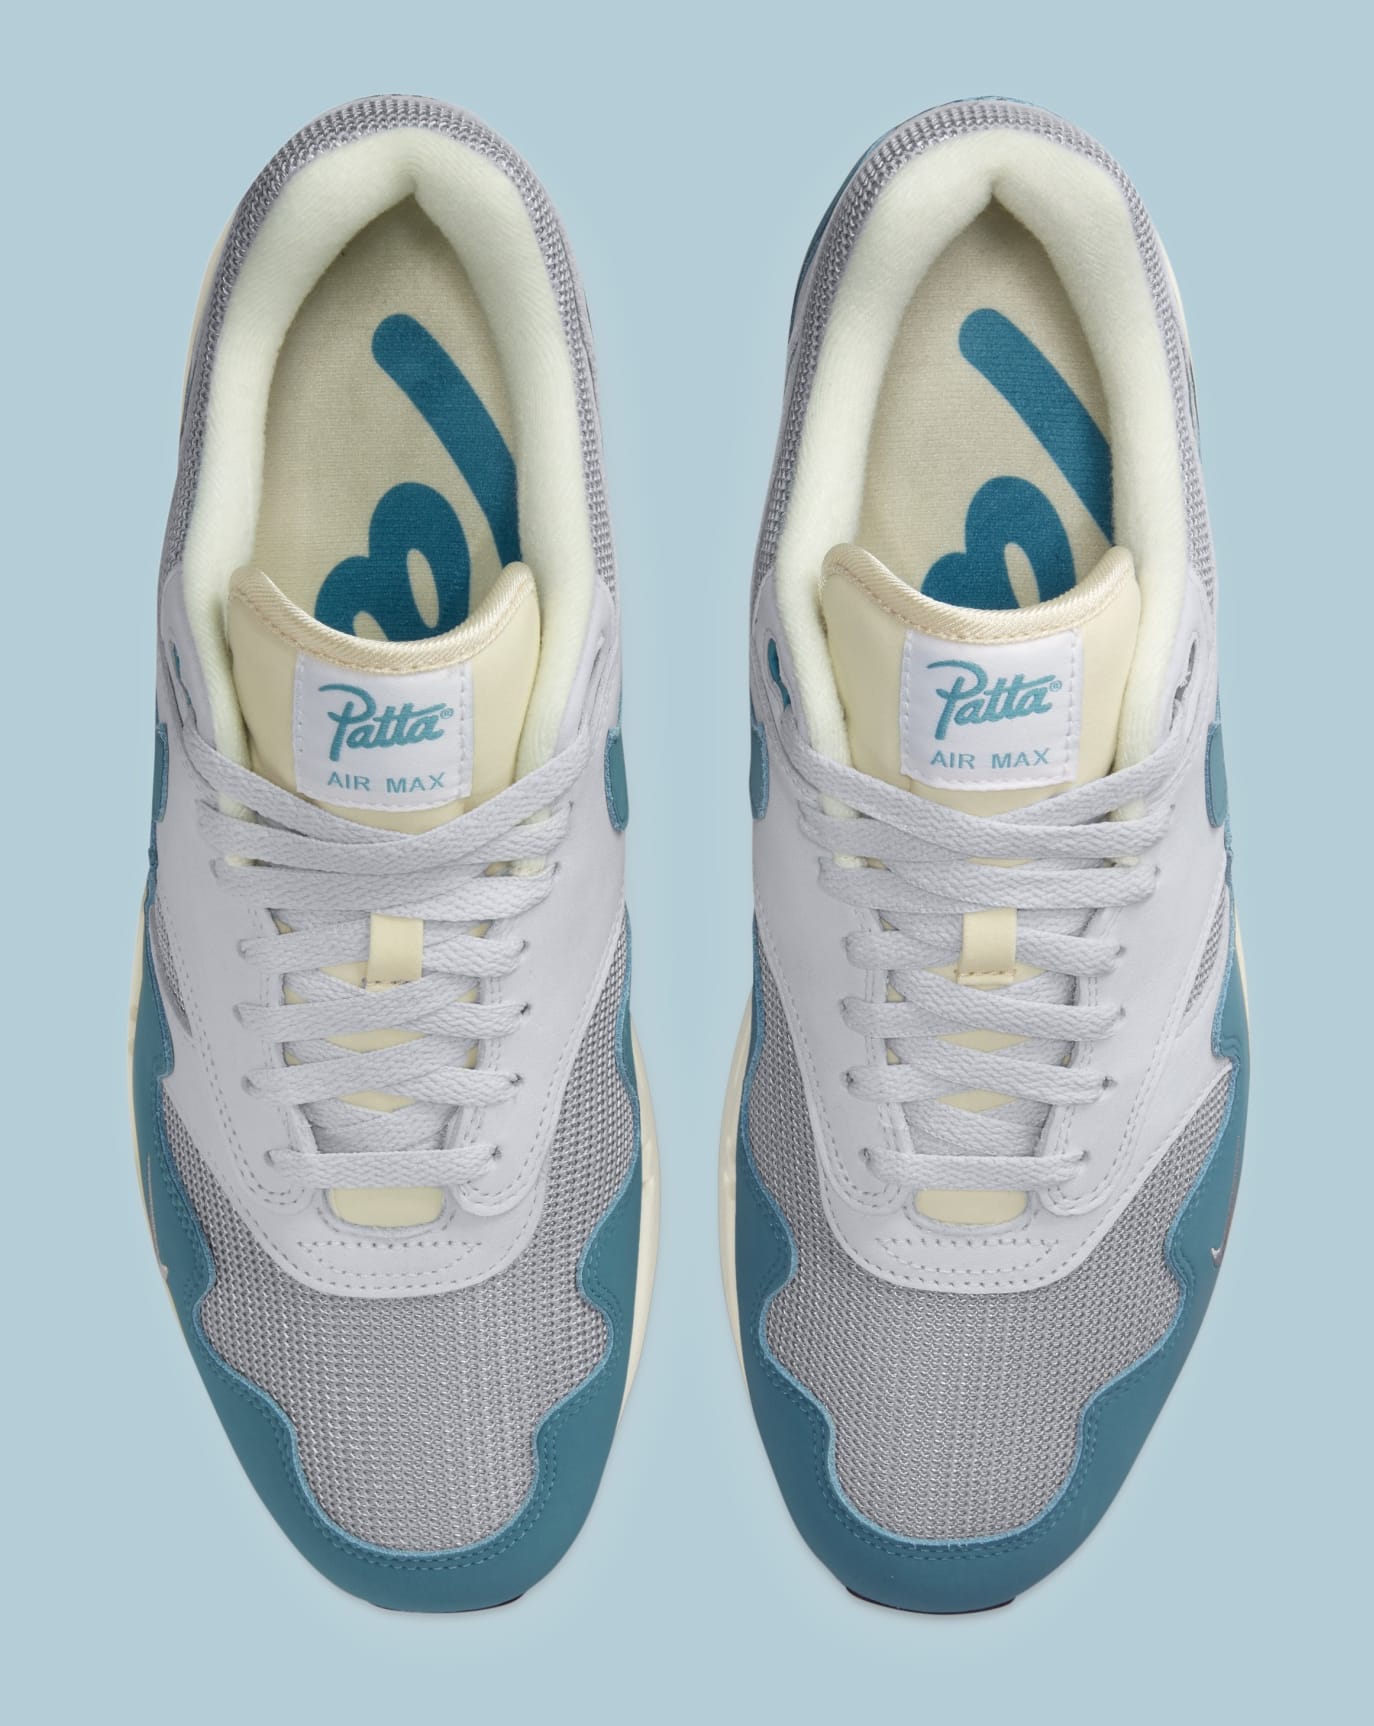 Patta's 'Pure Platinum' Nike Air Max 1 Collab Releases This Week